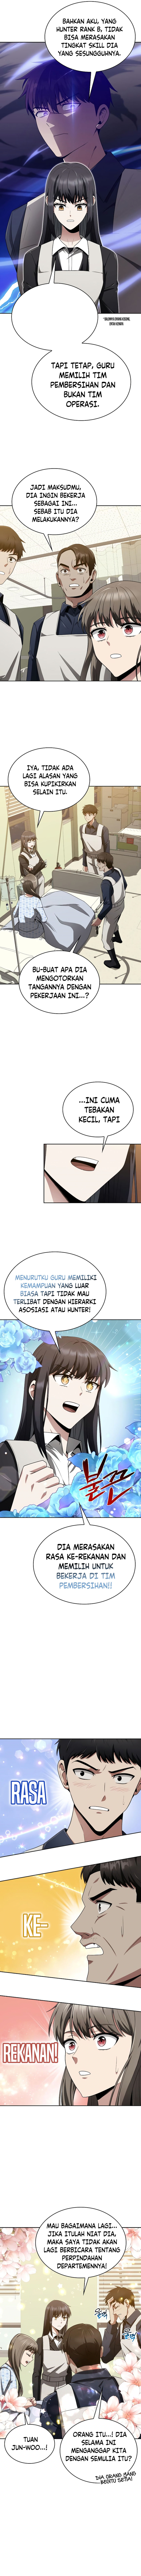 Dilarang COPAS - situs resmi www.mangacanblog.com - Komik clever cleaning life of the returned genius hunter 009 - chapter 9 10 Indonesia clever cleaning life of the returned genius hunter 009 - chapter 9 Terbaru 11|Baca Manga Komik Indonesia|Mangacan